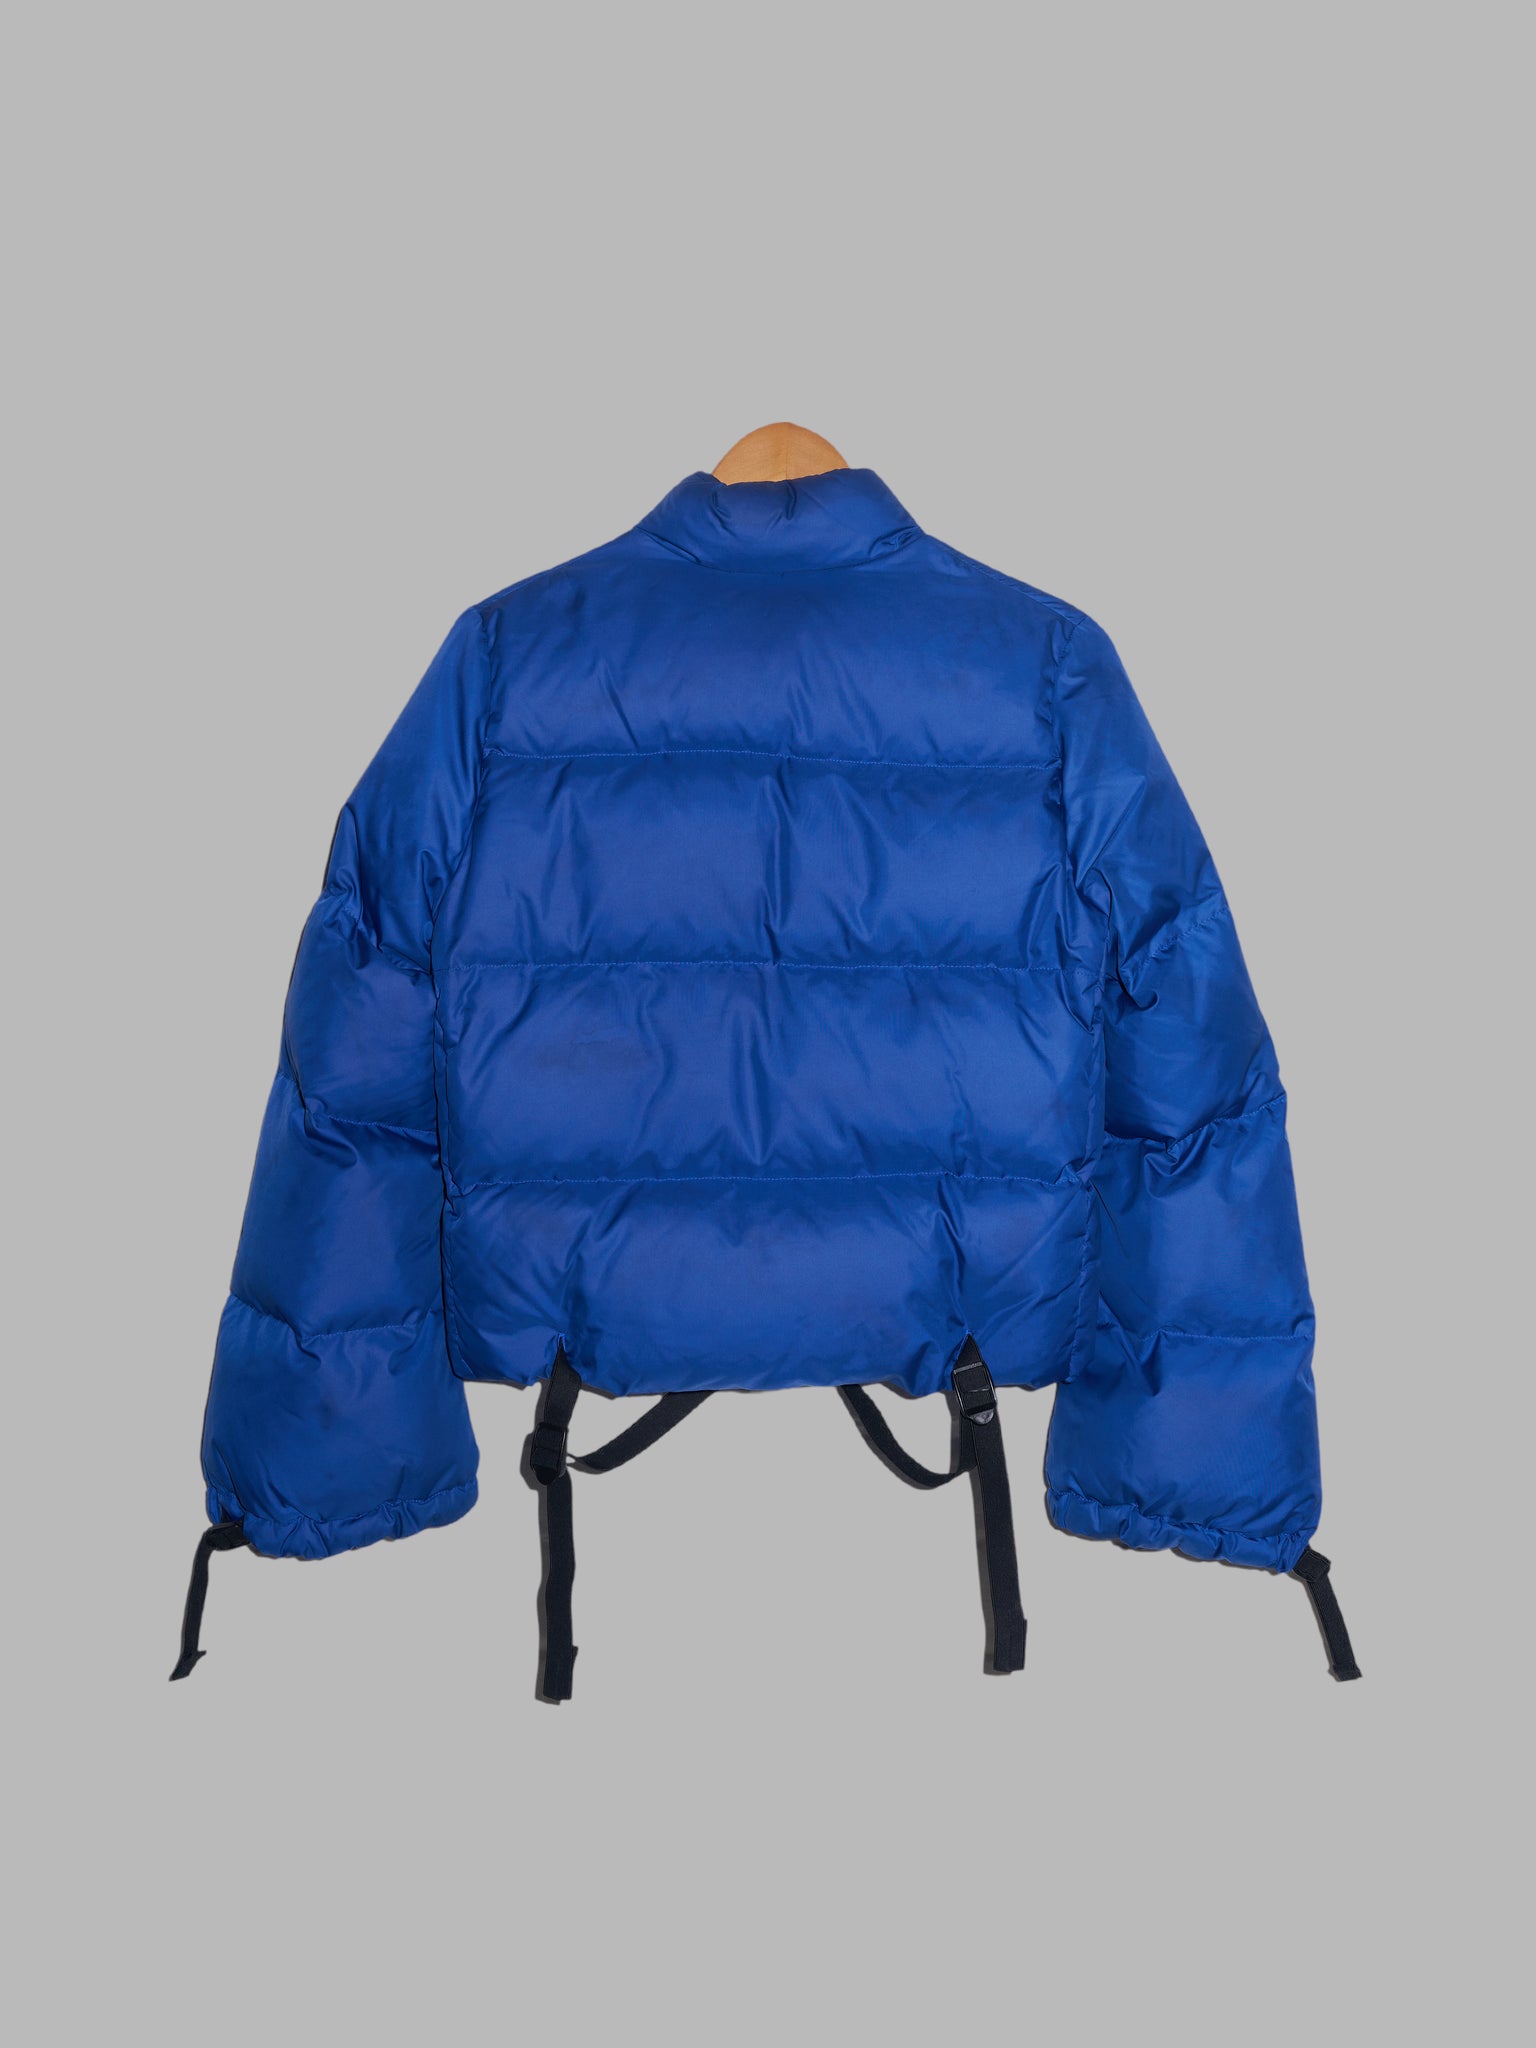 Junya Watanabe Comme des Garcons AW2007 blue poly tape detail puffer jacket